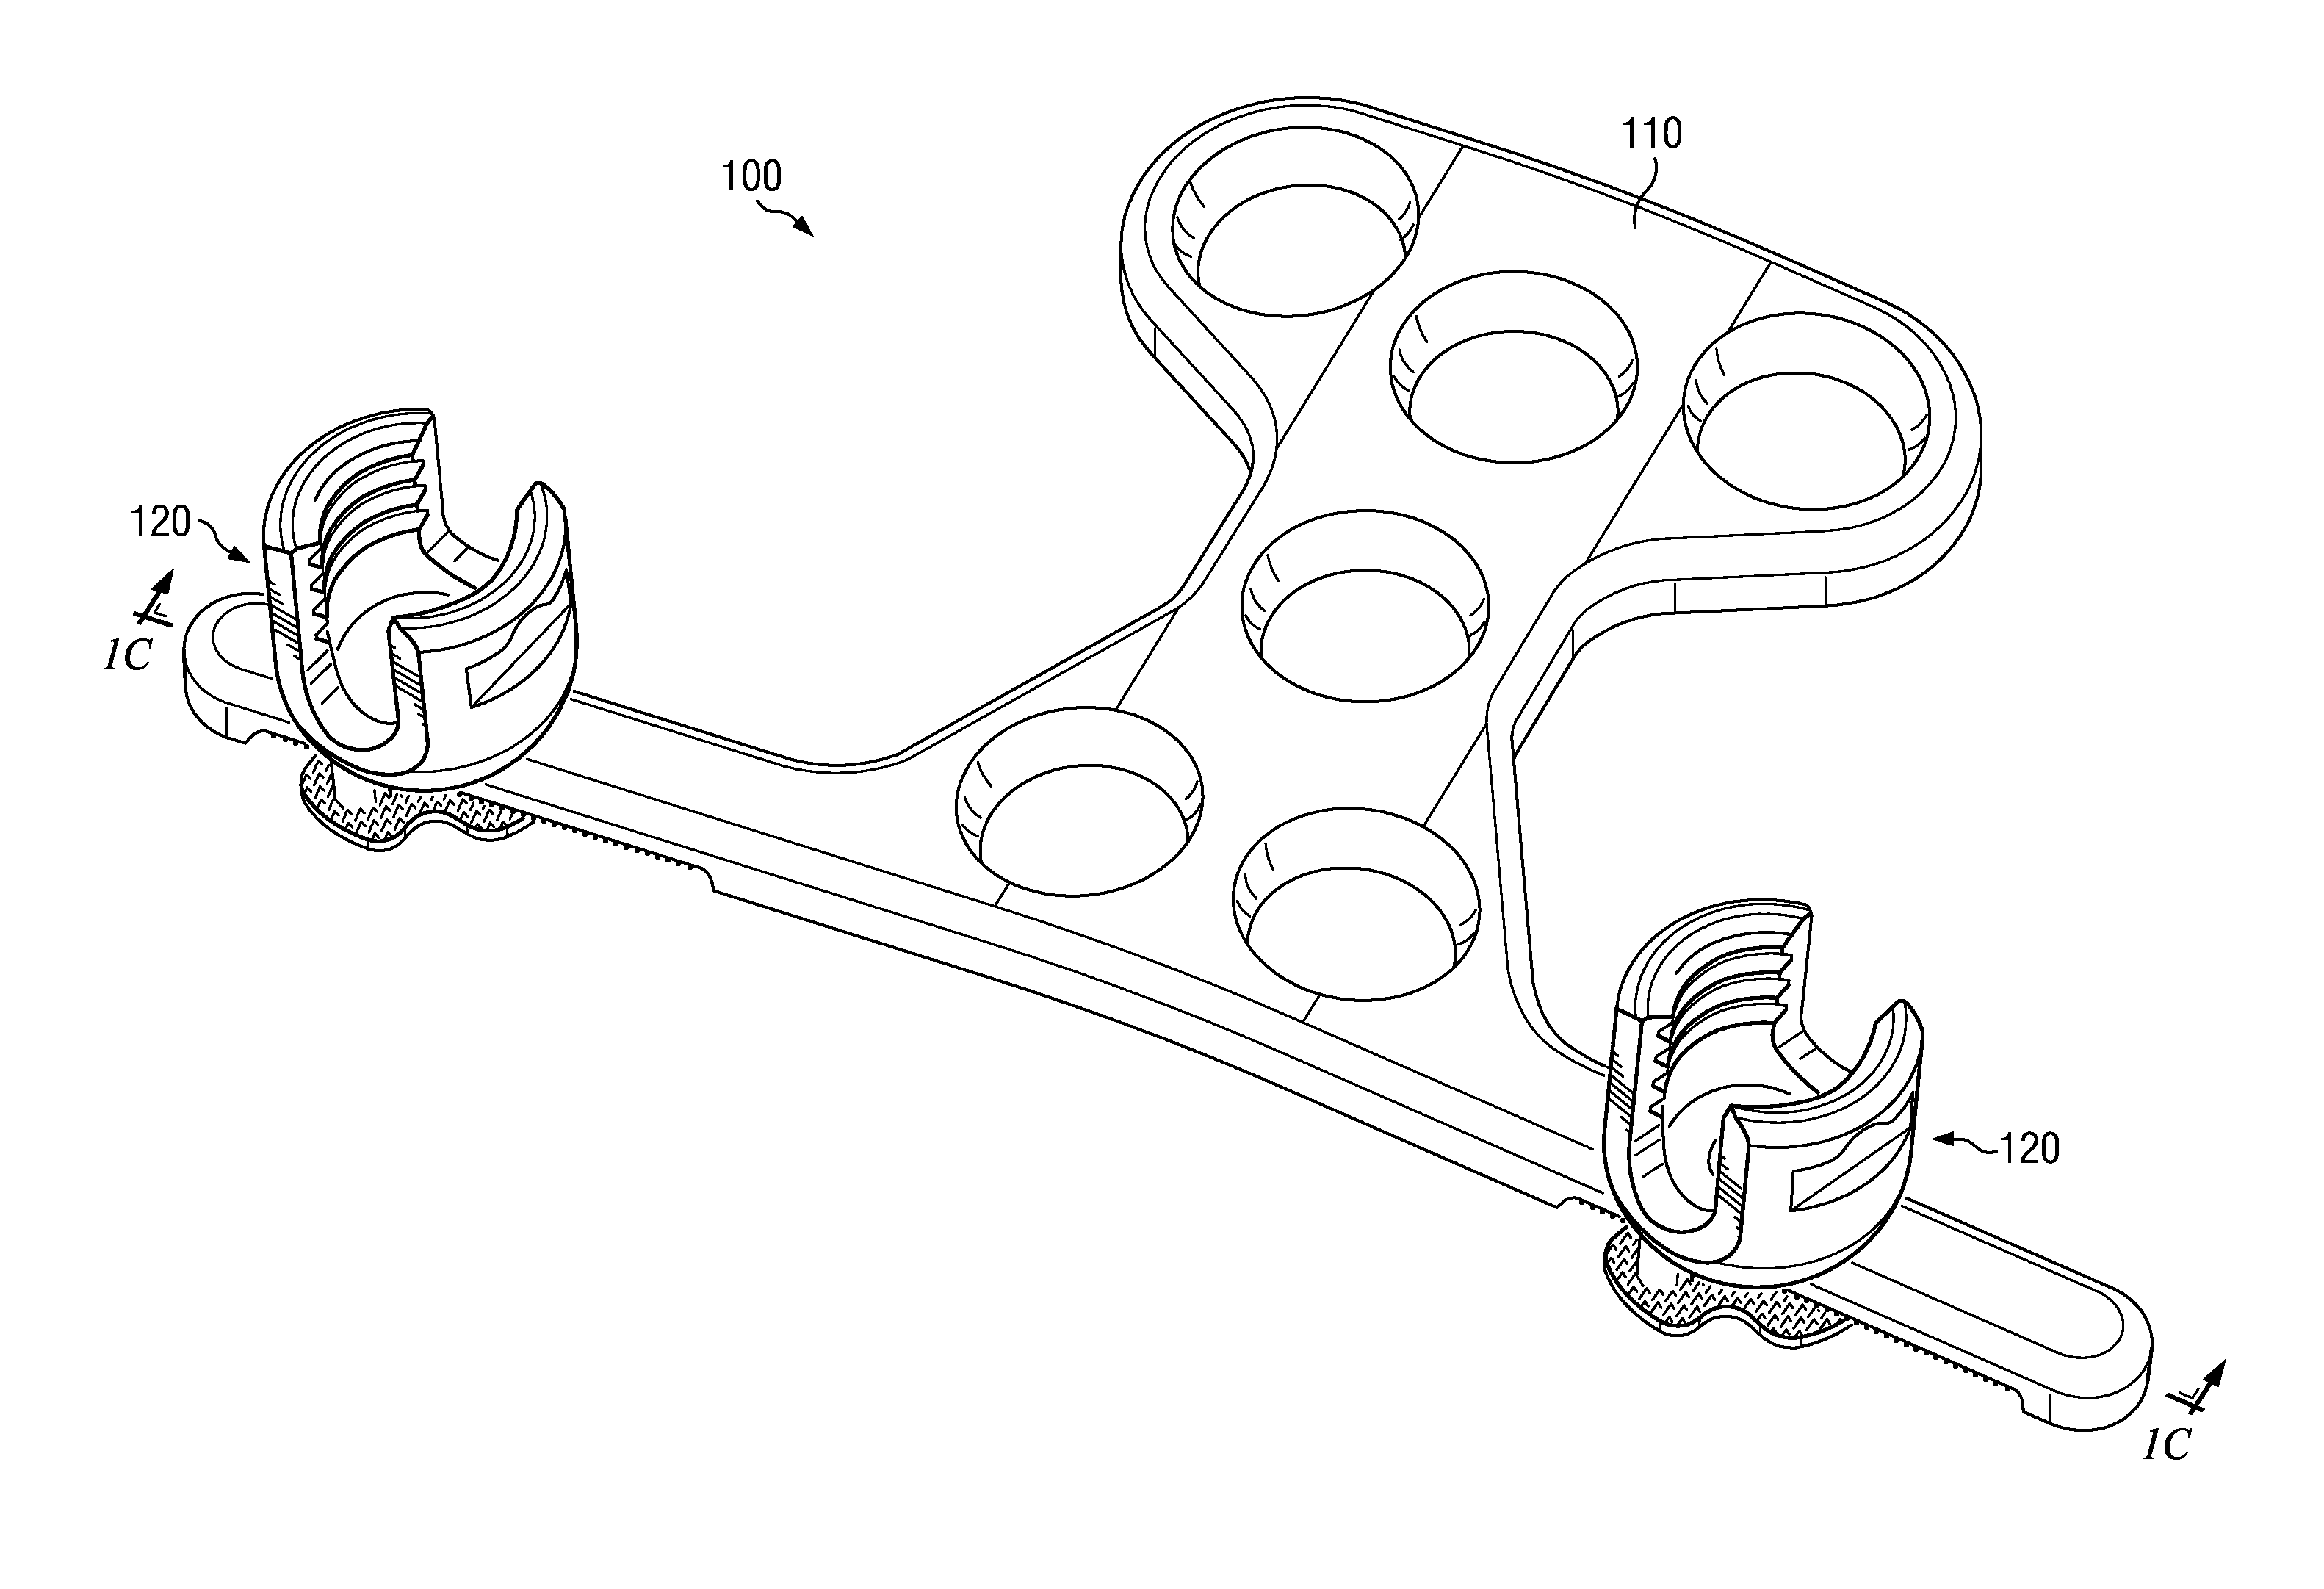 Occipito-cervical fixation assembly and method for constructing same